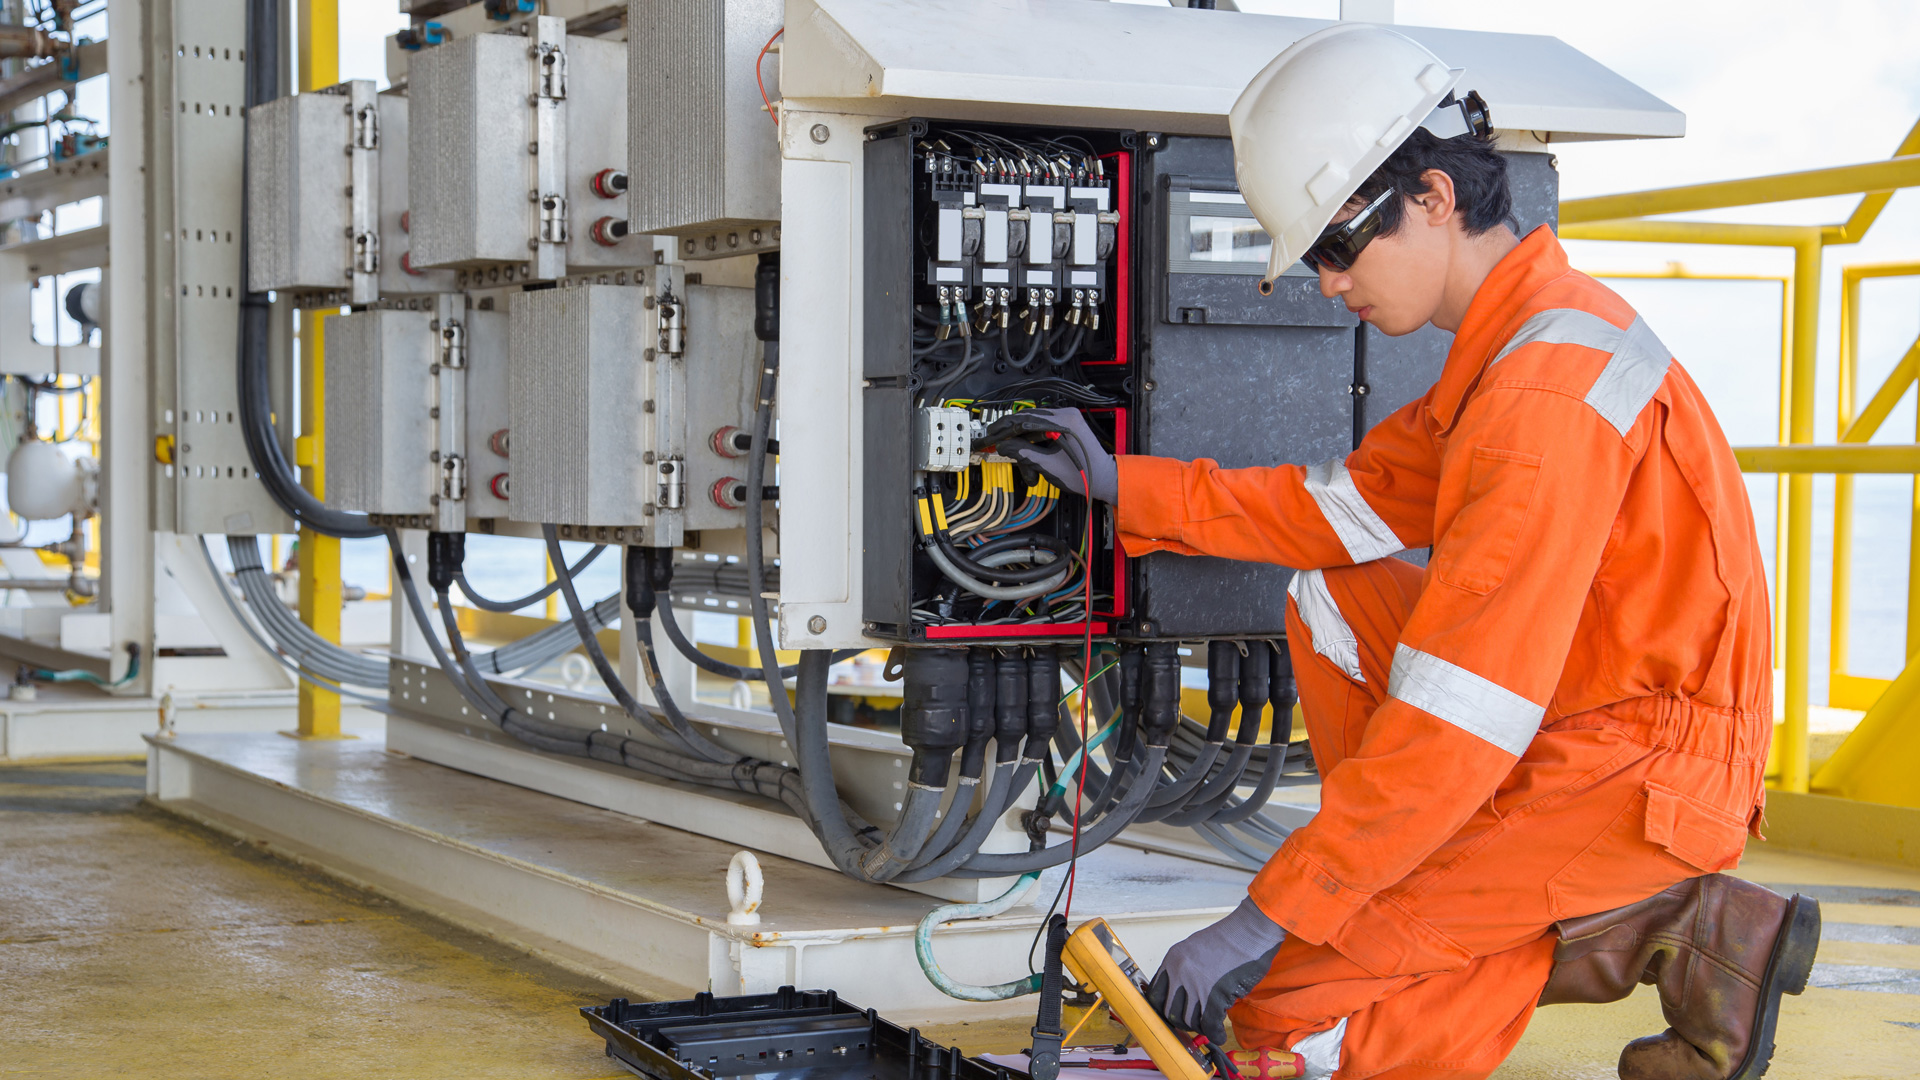 Oil and gas electrician working on electrical equipment